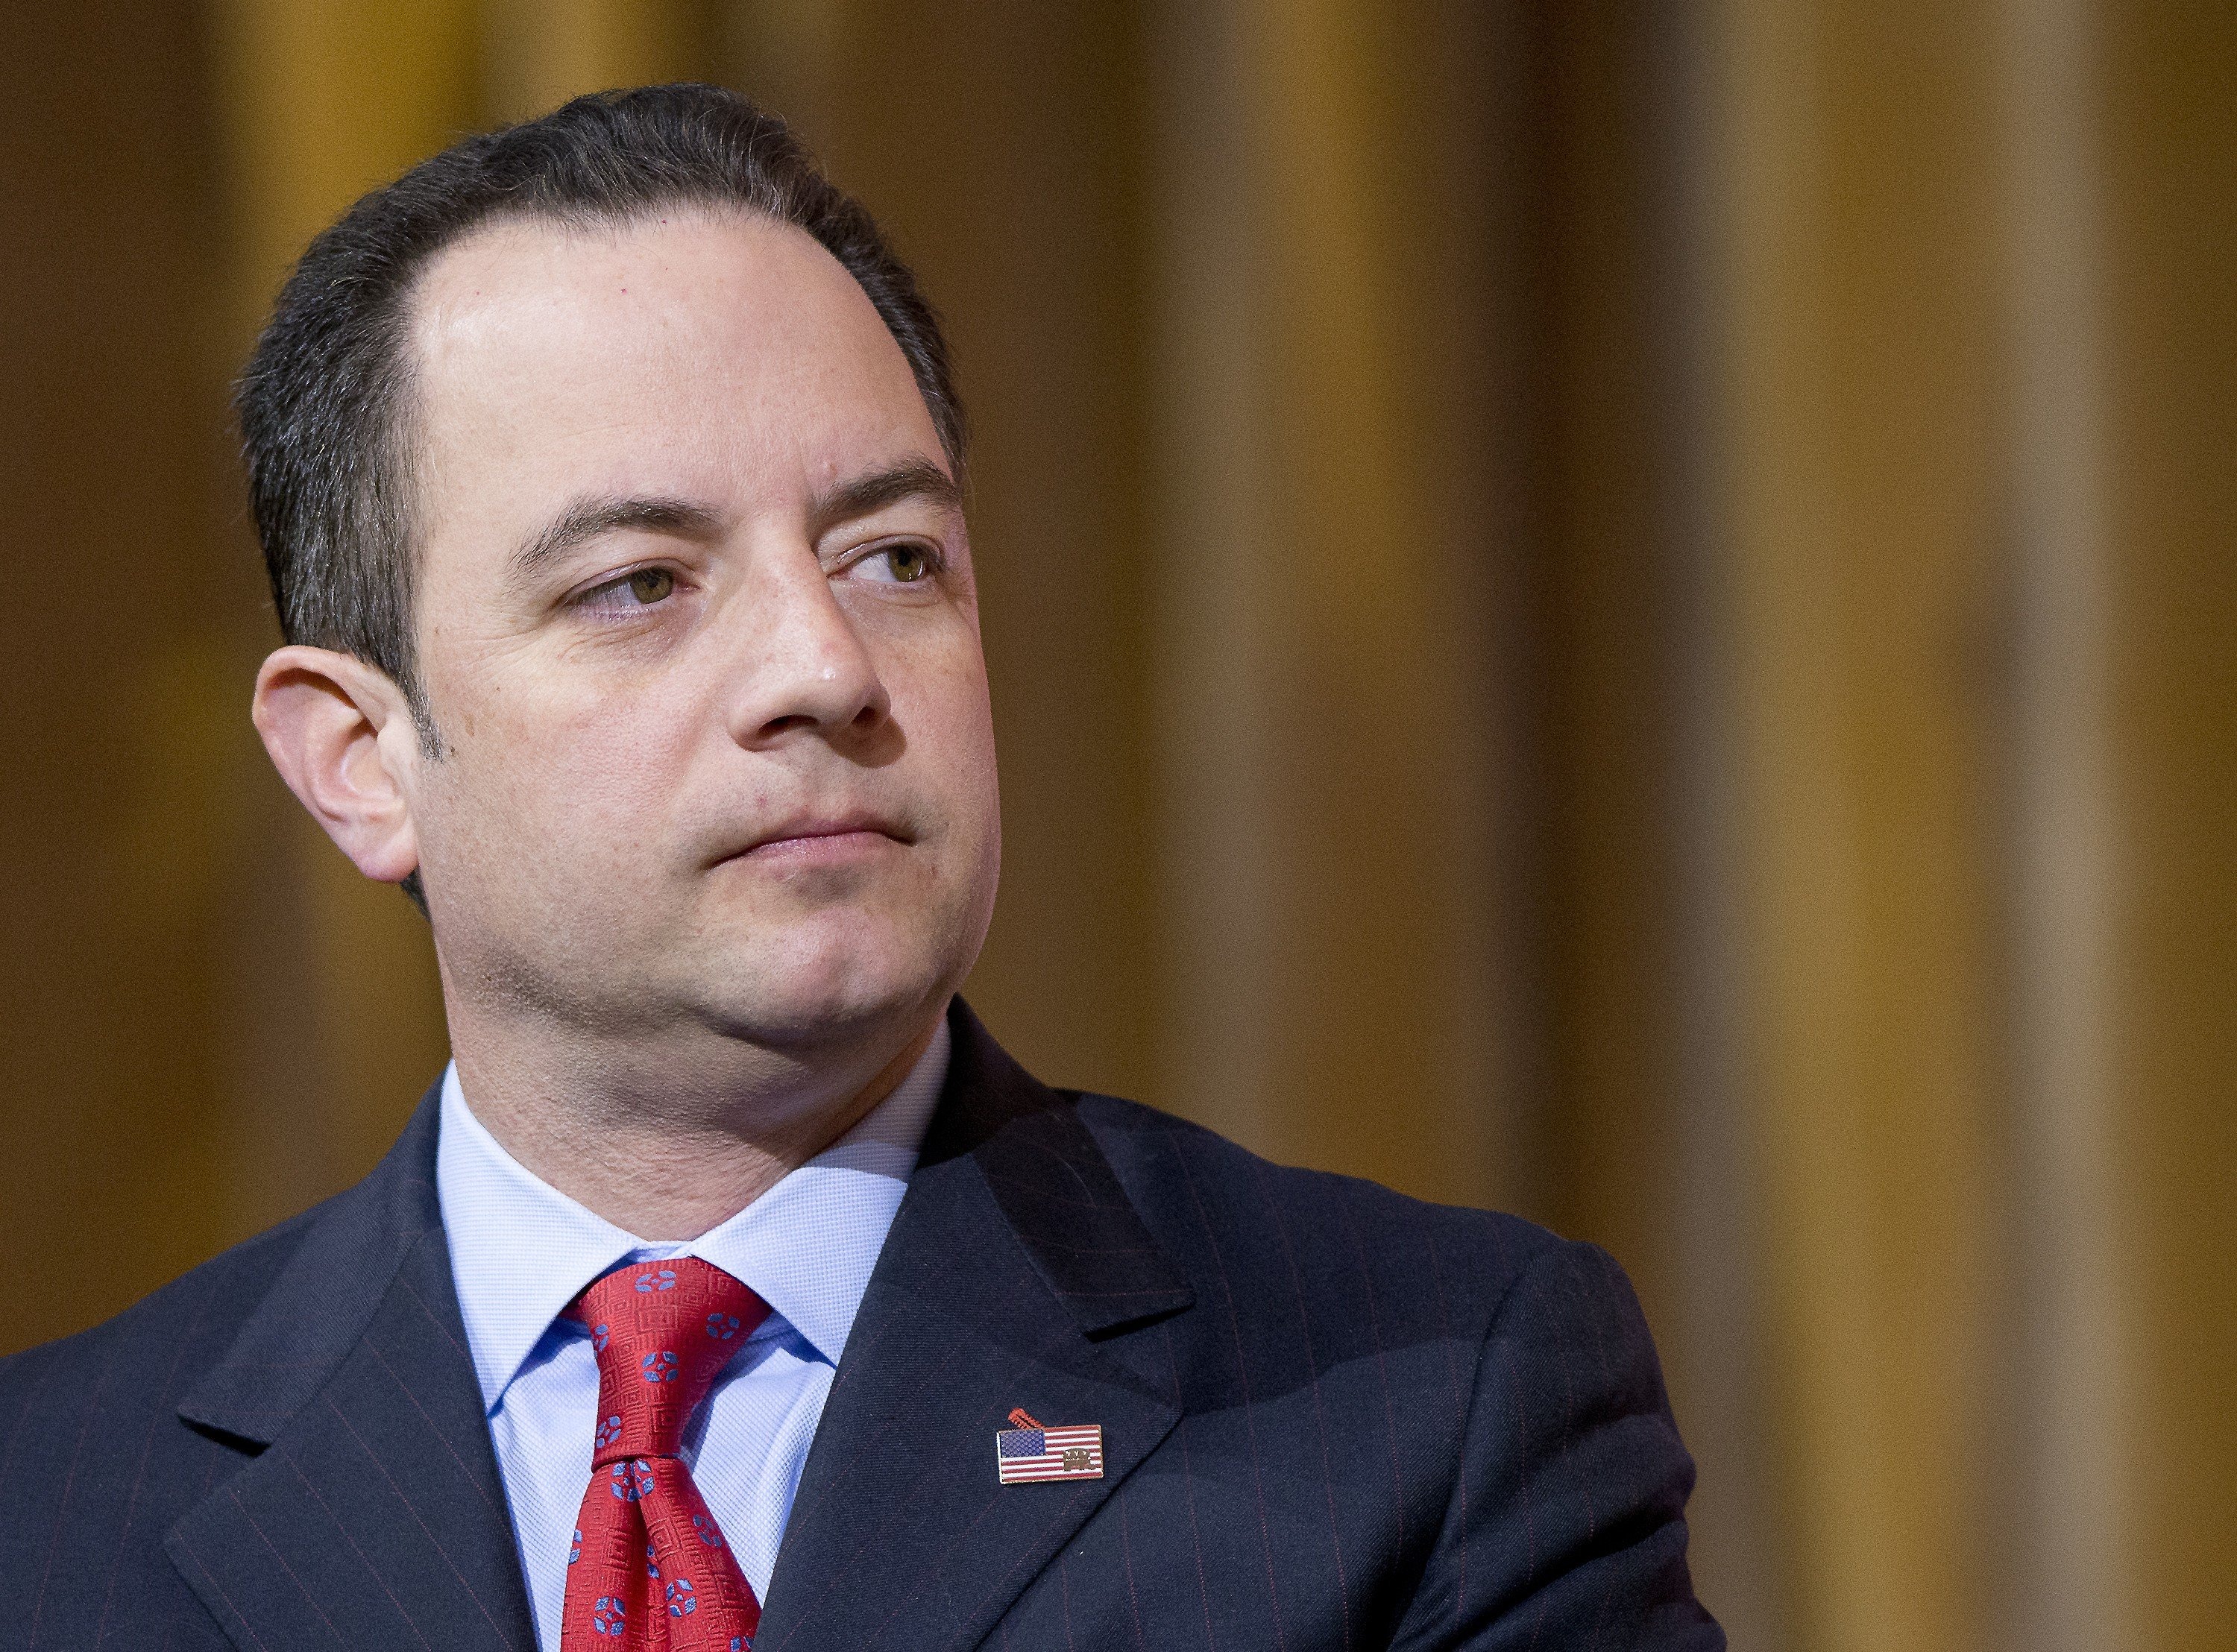 Reince Priebus, Chairman of the Republican National Committee, participates on a panel at the Conservative Political Action Conference at the Gaylord National at National Harbor, Md., March 8, 2014. (Ron Sachs—CNP/AdMedia/Corbis)